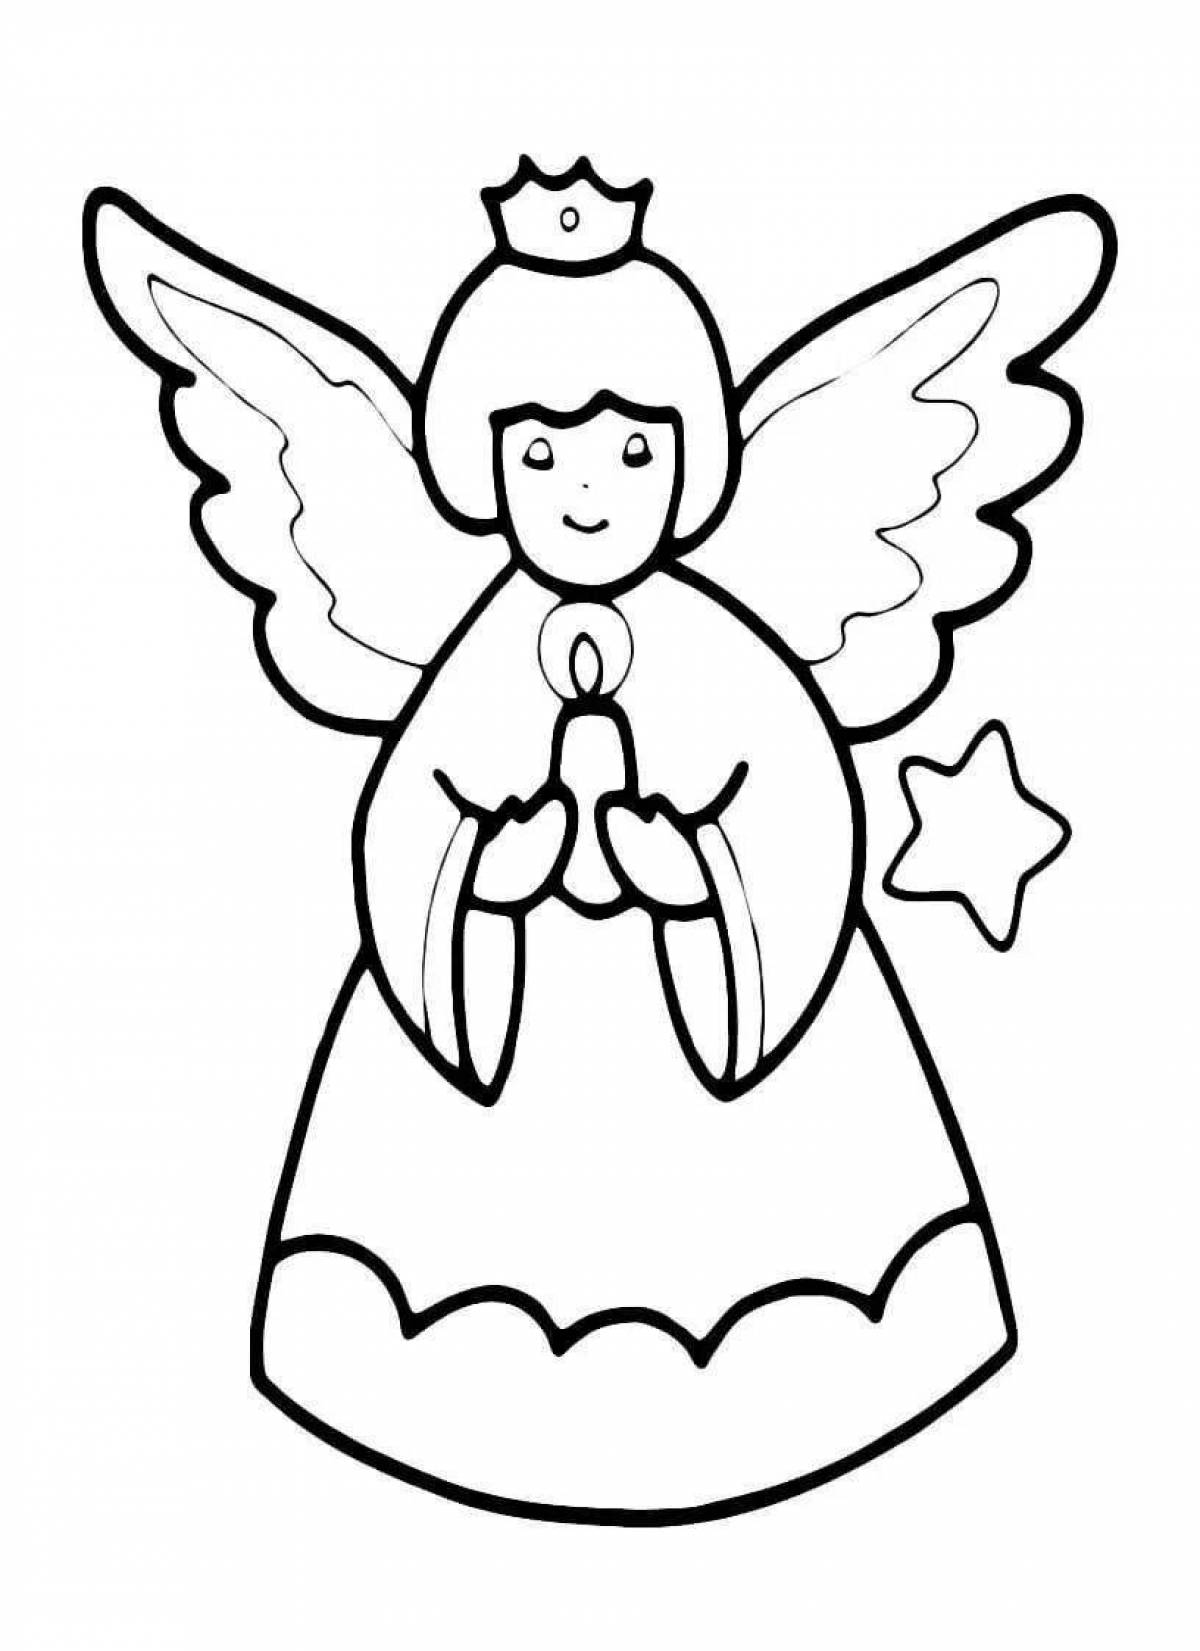 Coloring book gorgeous Christmas angel